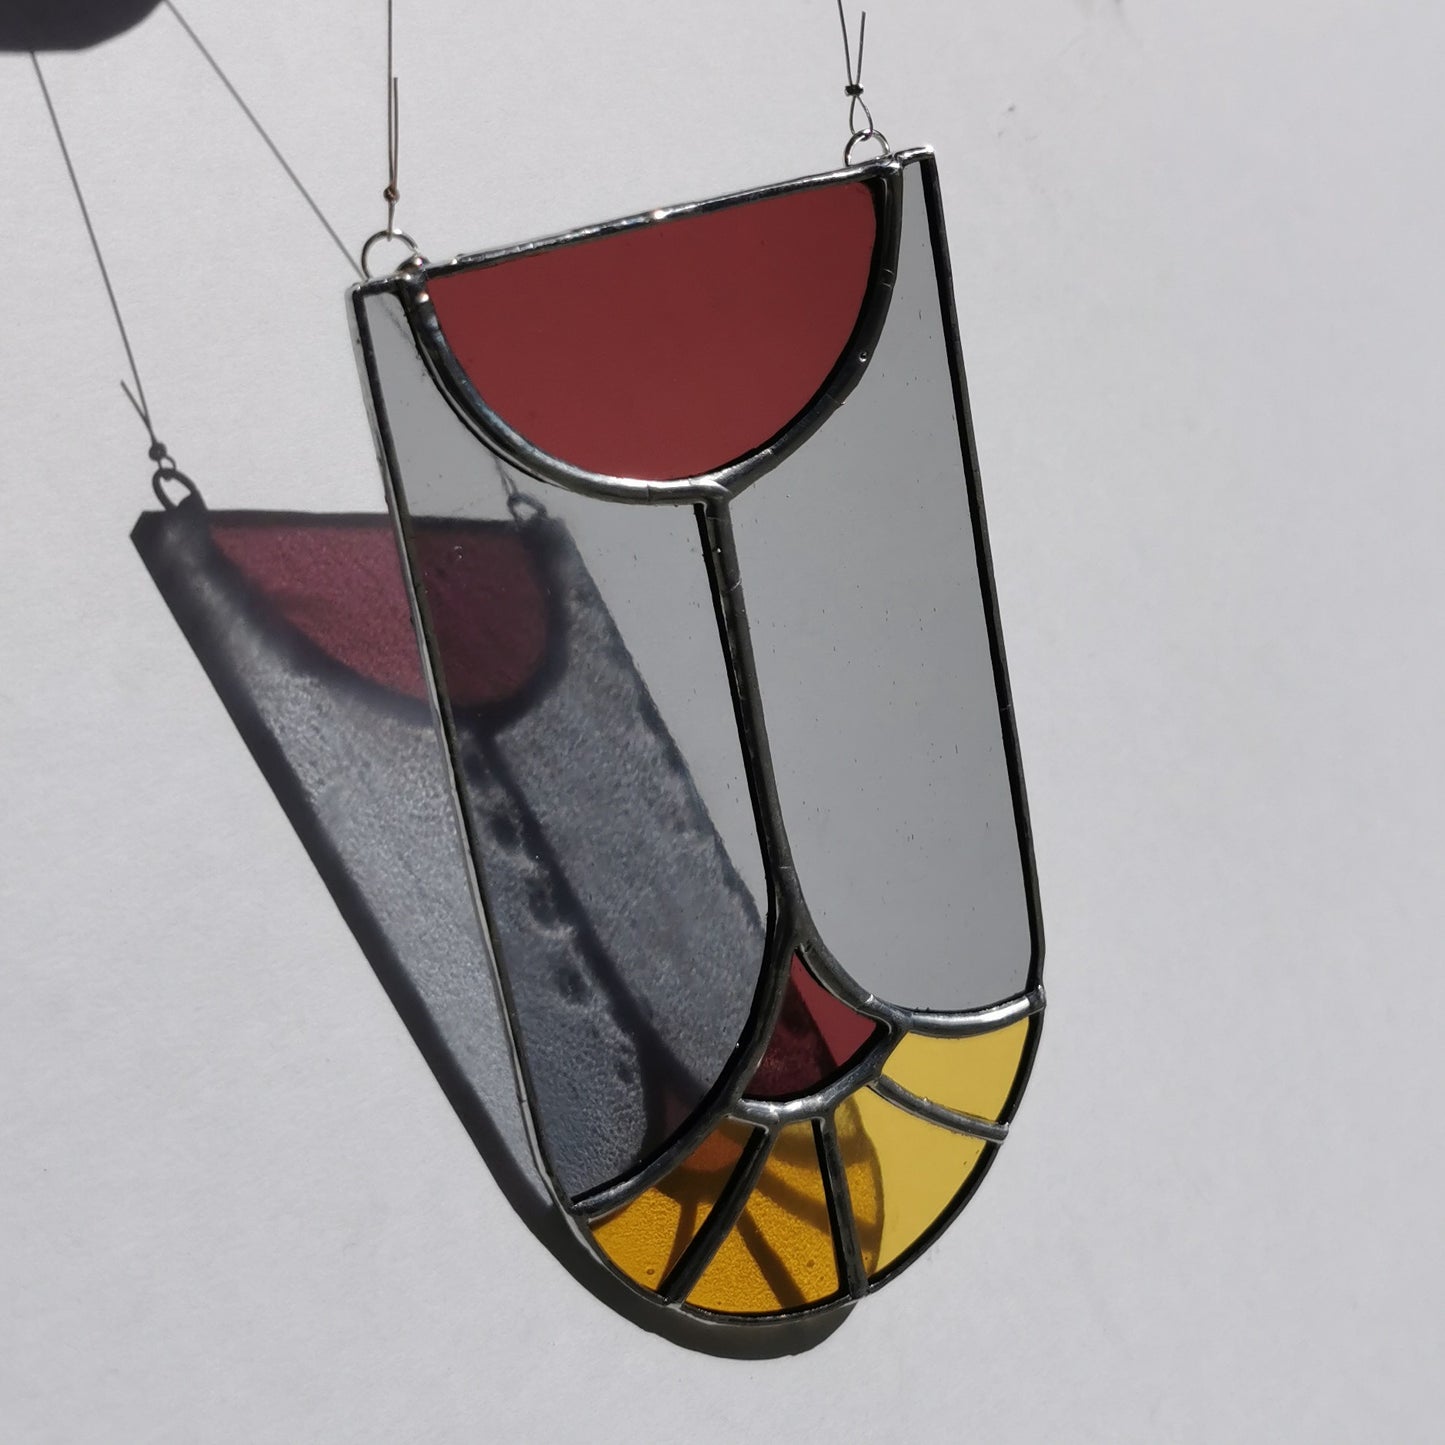 One day stained glass crash course